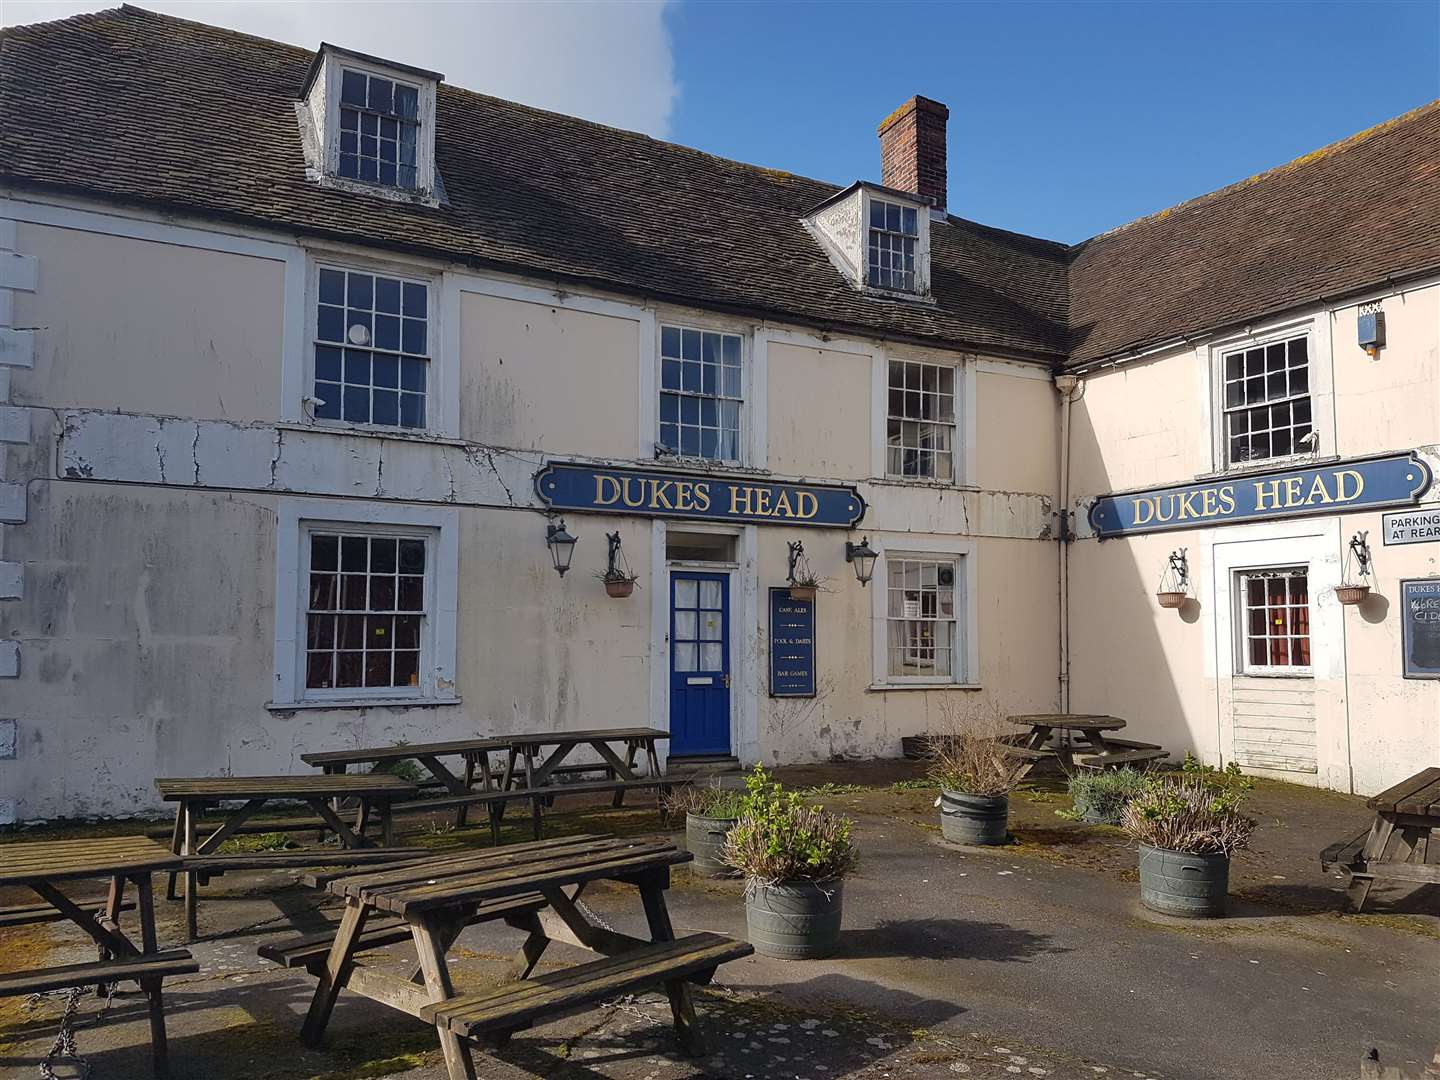 The Dukes Head has been empty for seven years